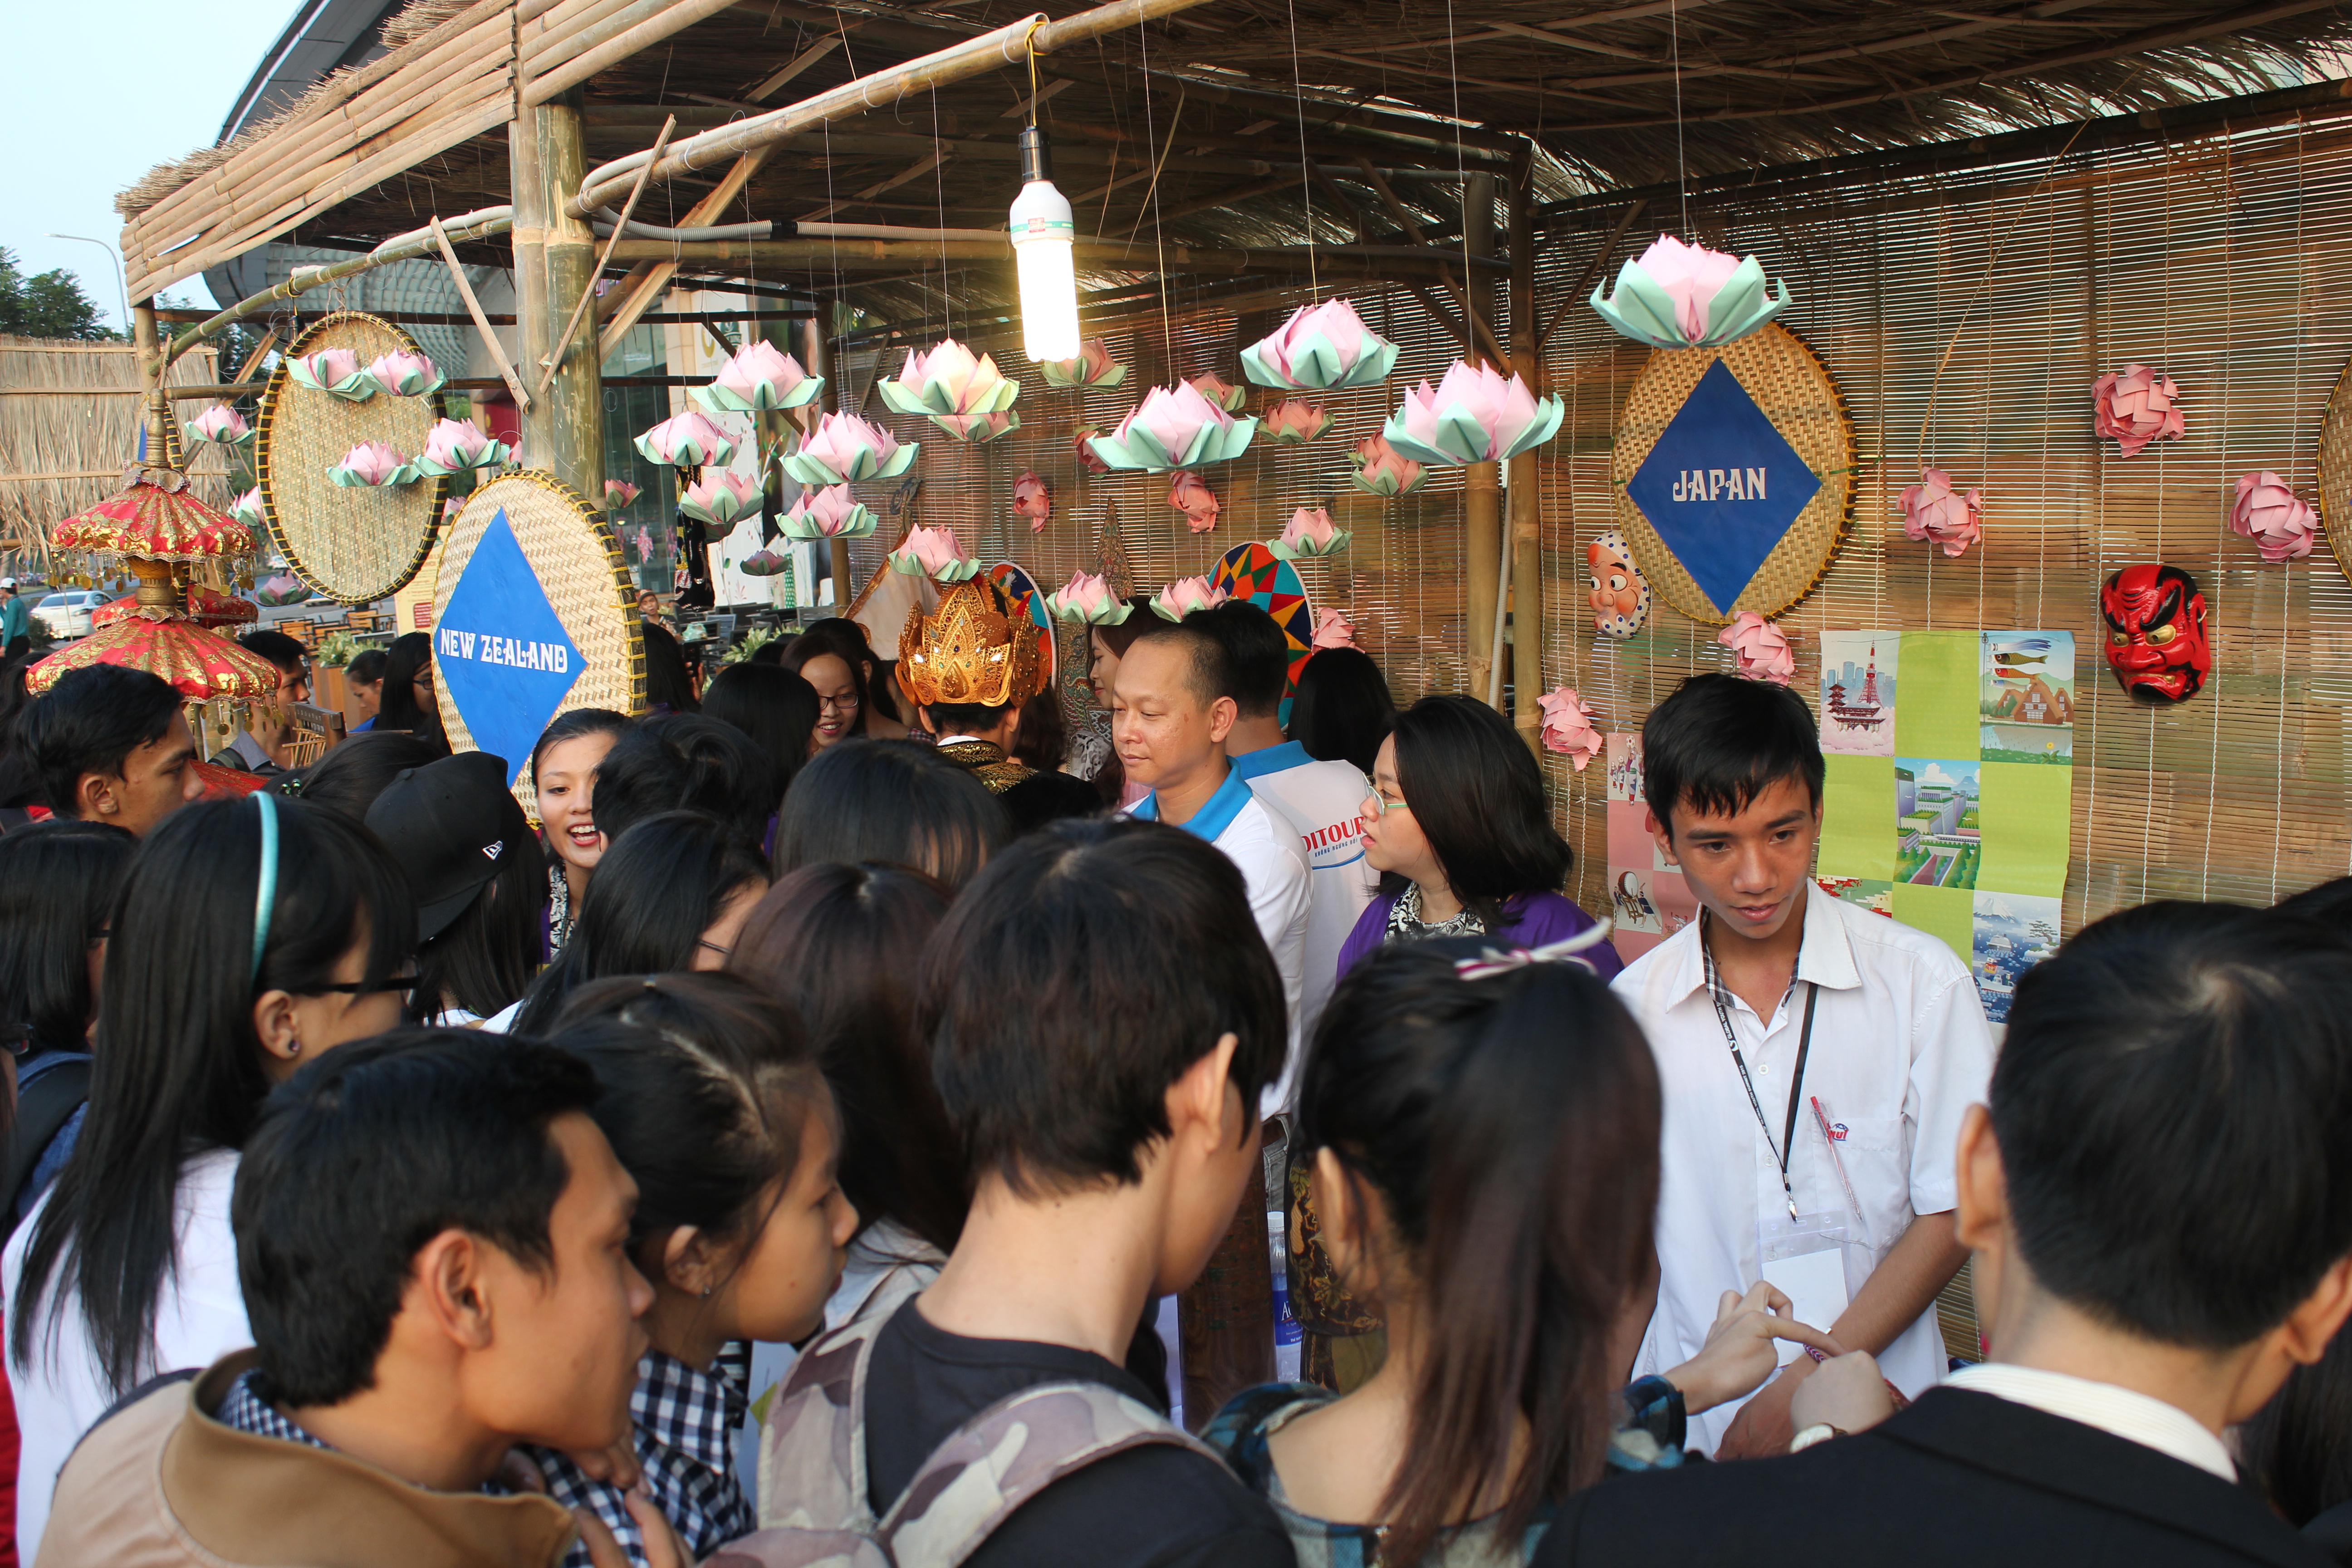 Global Village brings worldwide cultures to Ho Chi Minh City